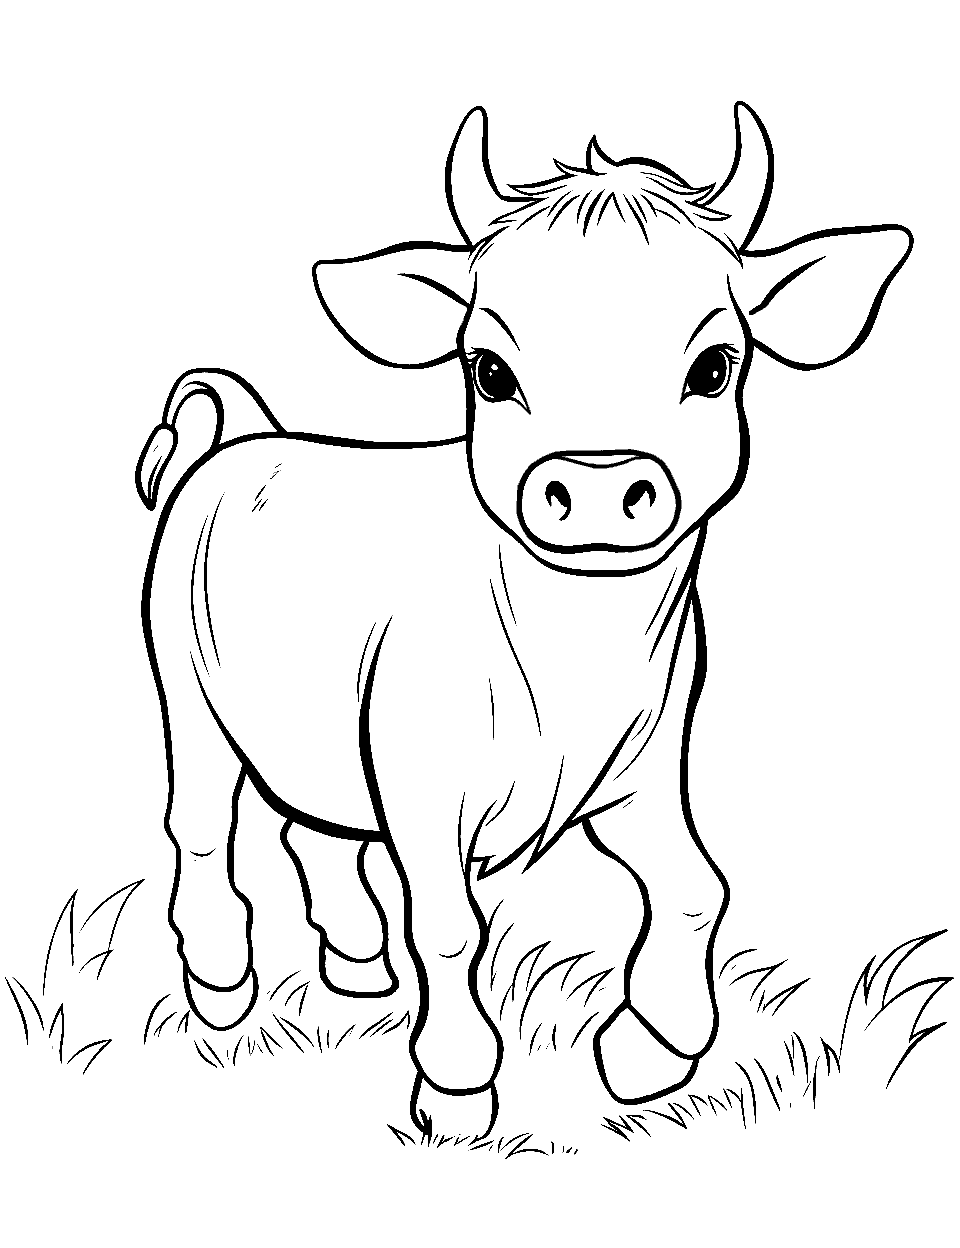 Playful Calf Coloring Page - A playful calf joyously prancing in a sparse, sunny meadow.